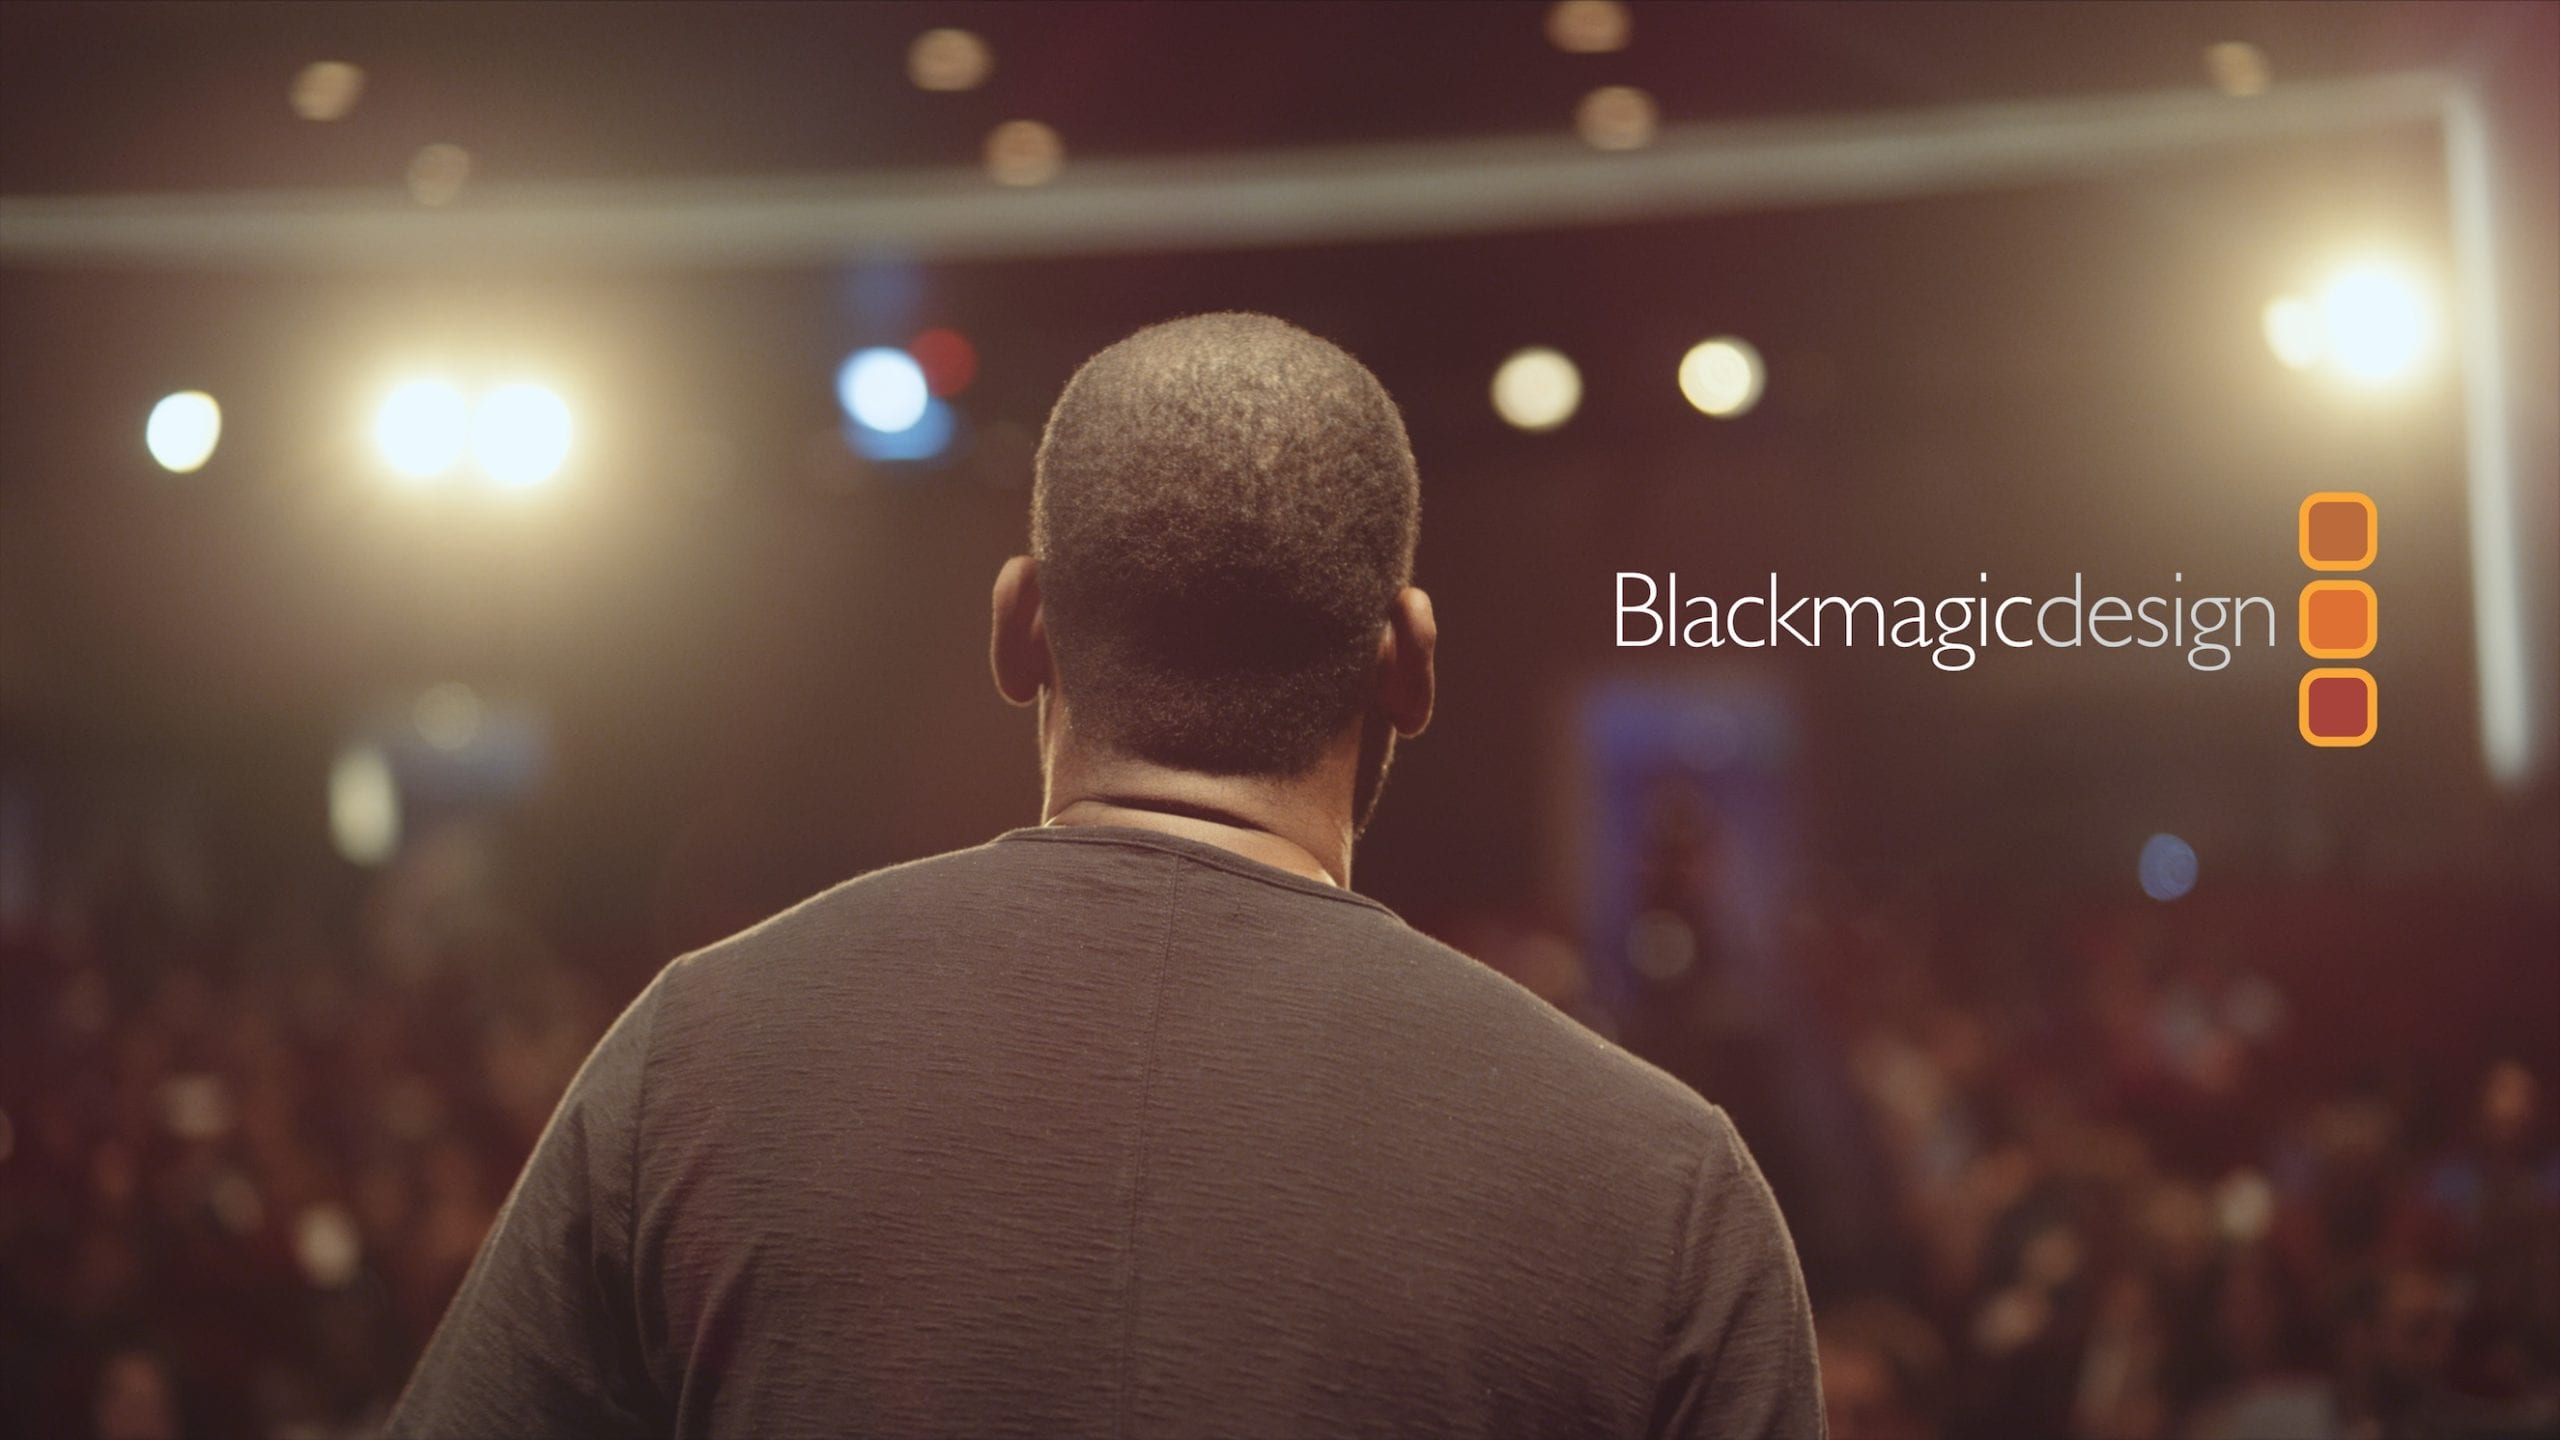 Editfest 2019 sponsored by Blackmagic Design logo with view from behind of a man addressing an audience in the background